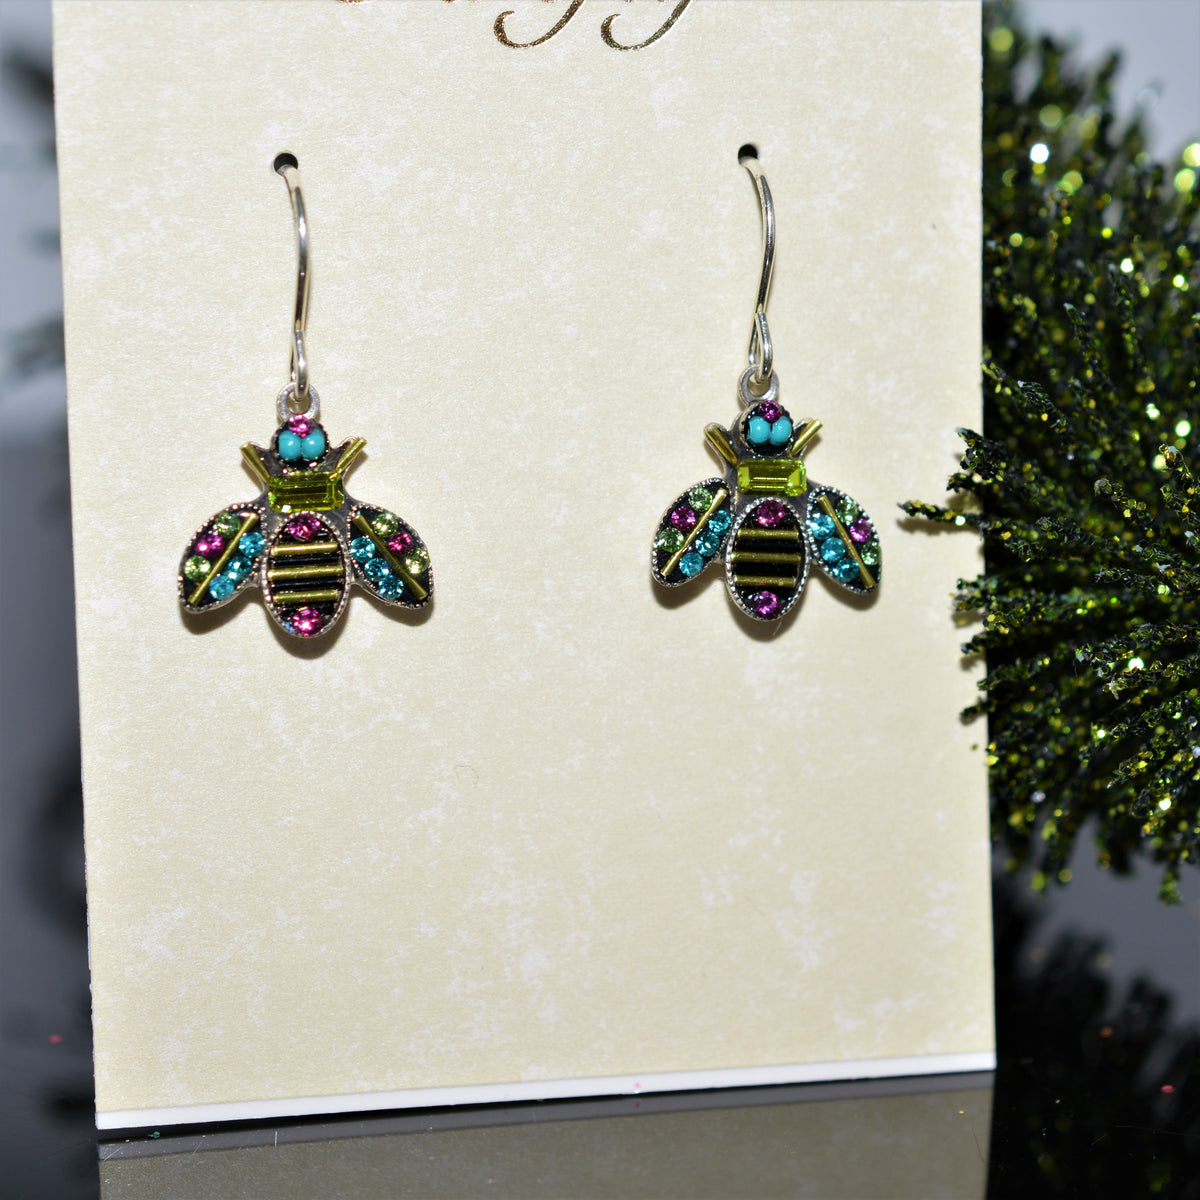 Antique Silver Plated Queen Bee Earrings With Citrus Green Crystals by Firefly